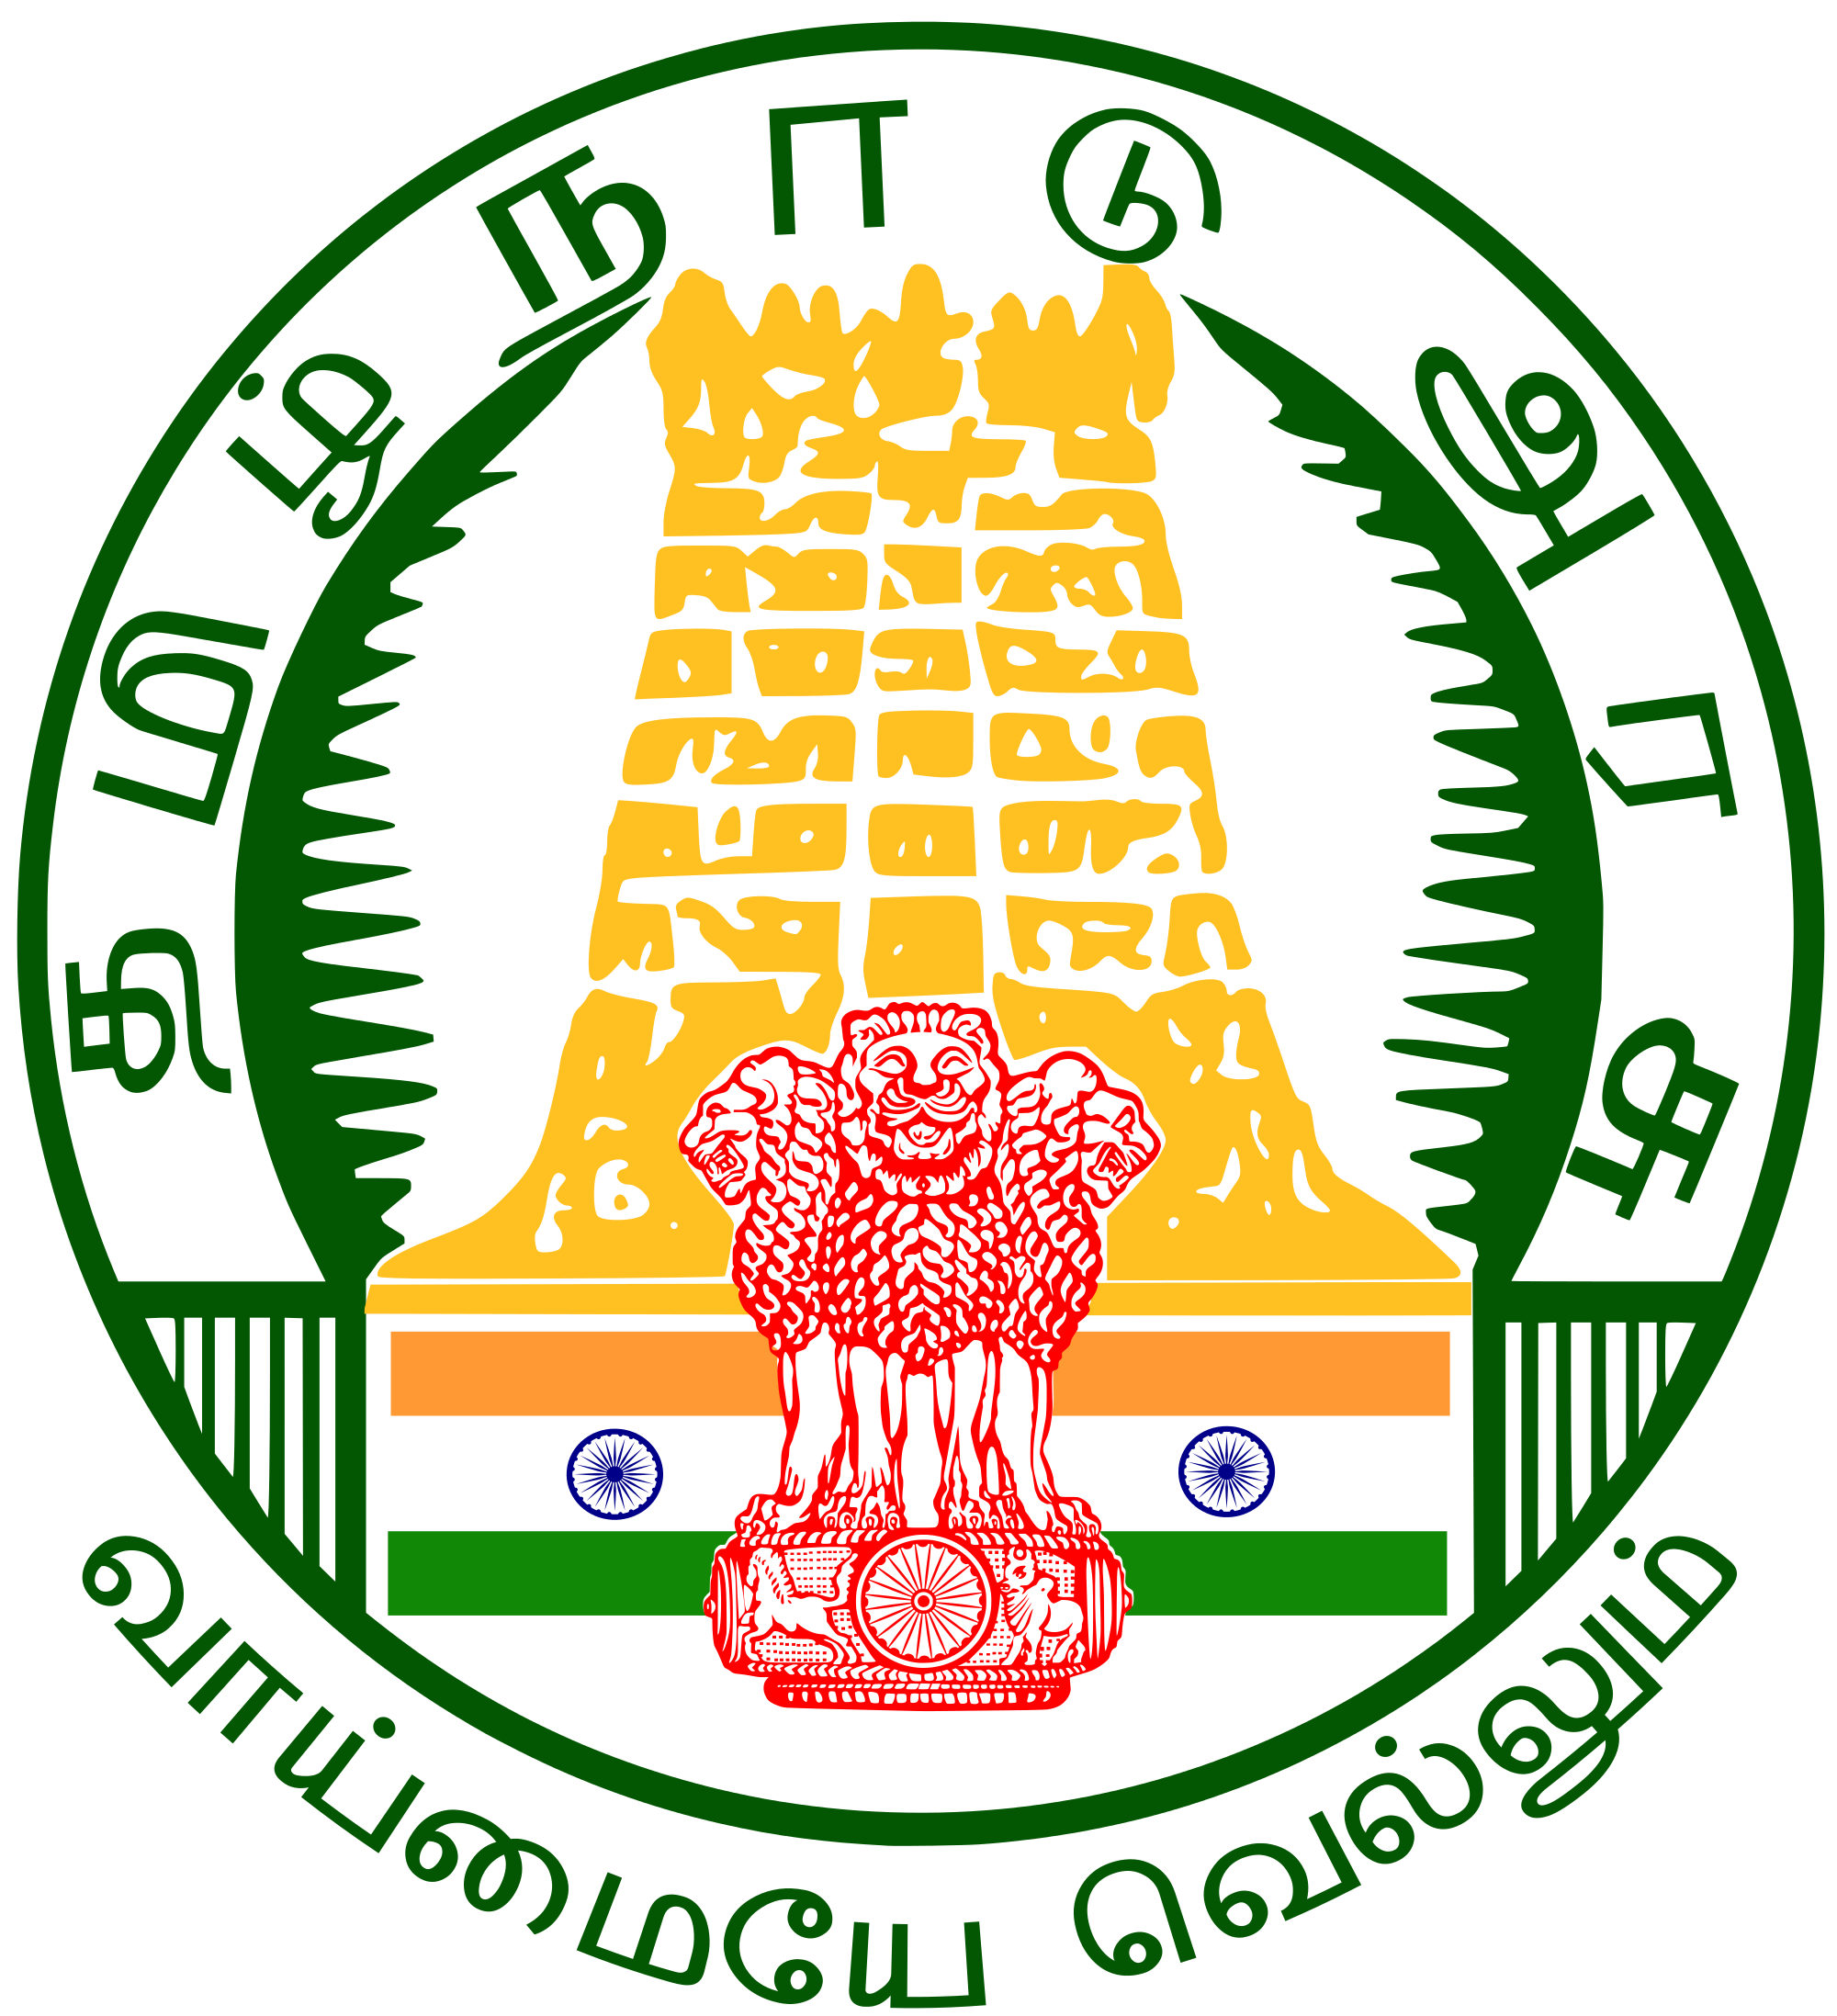 Government of Tamil Nadu - Wikipedia, the free encyclopedia